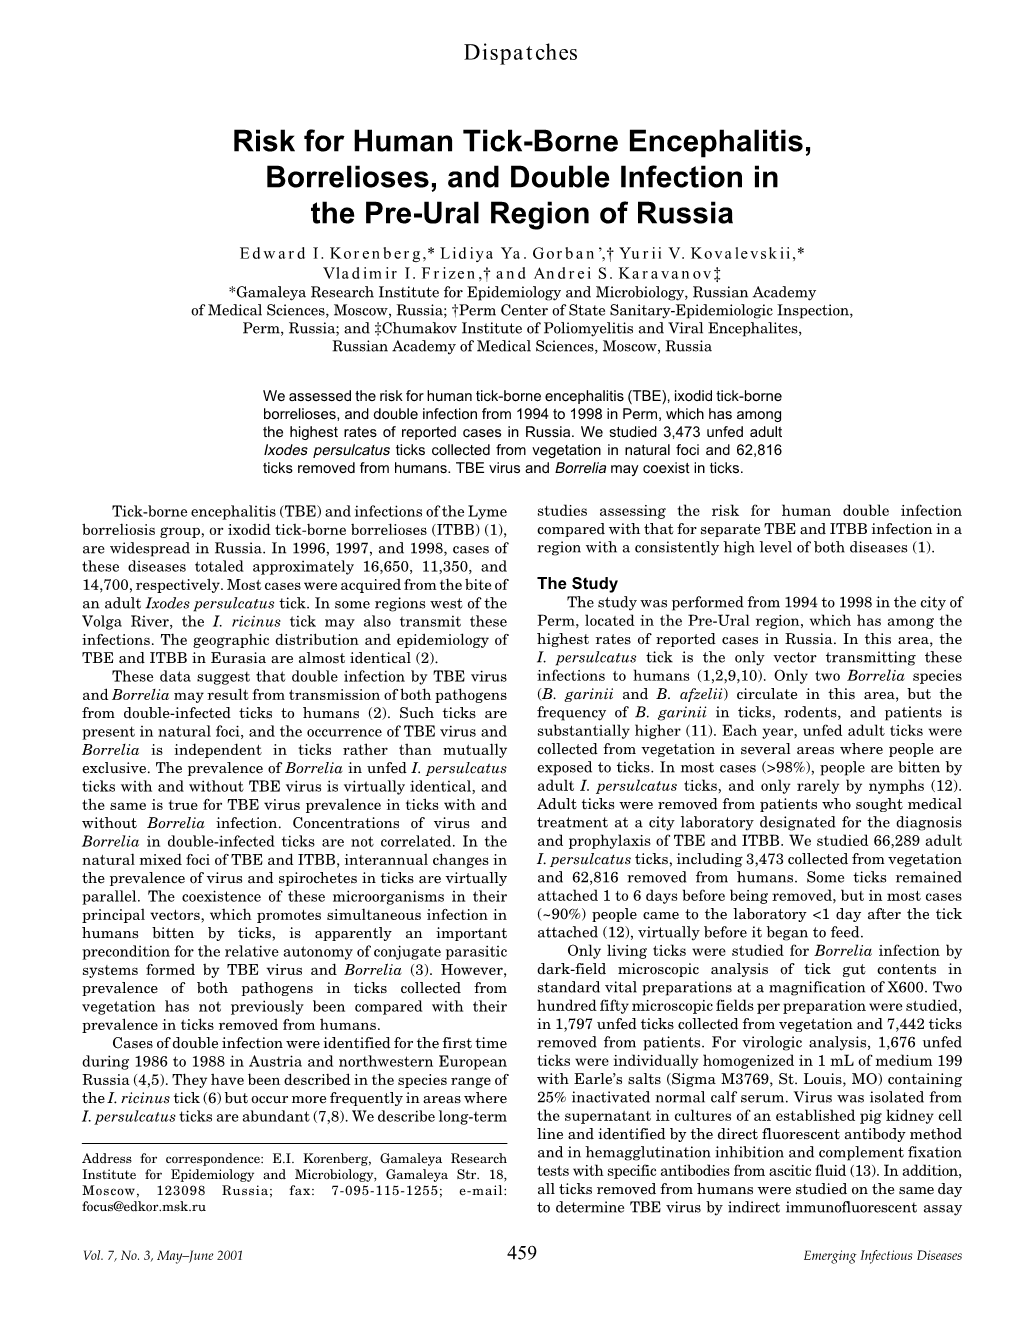 Risk for Human Tick-Borne Encephalitis, Borrelioses, and Double Infection in the Pre-Ural Region of Russia Edward I